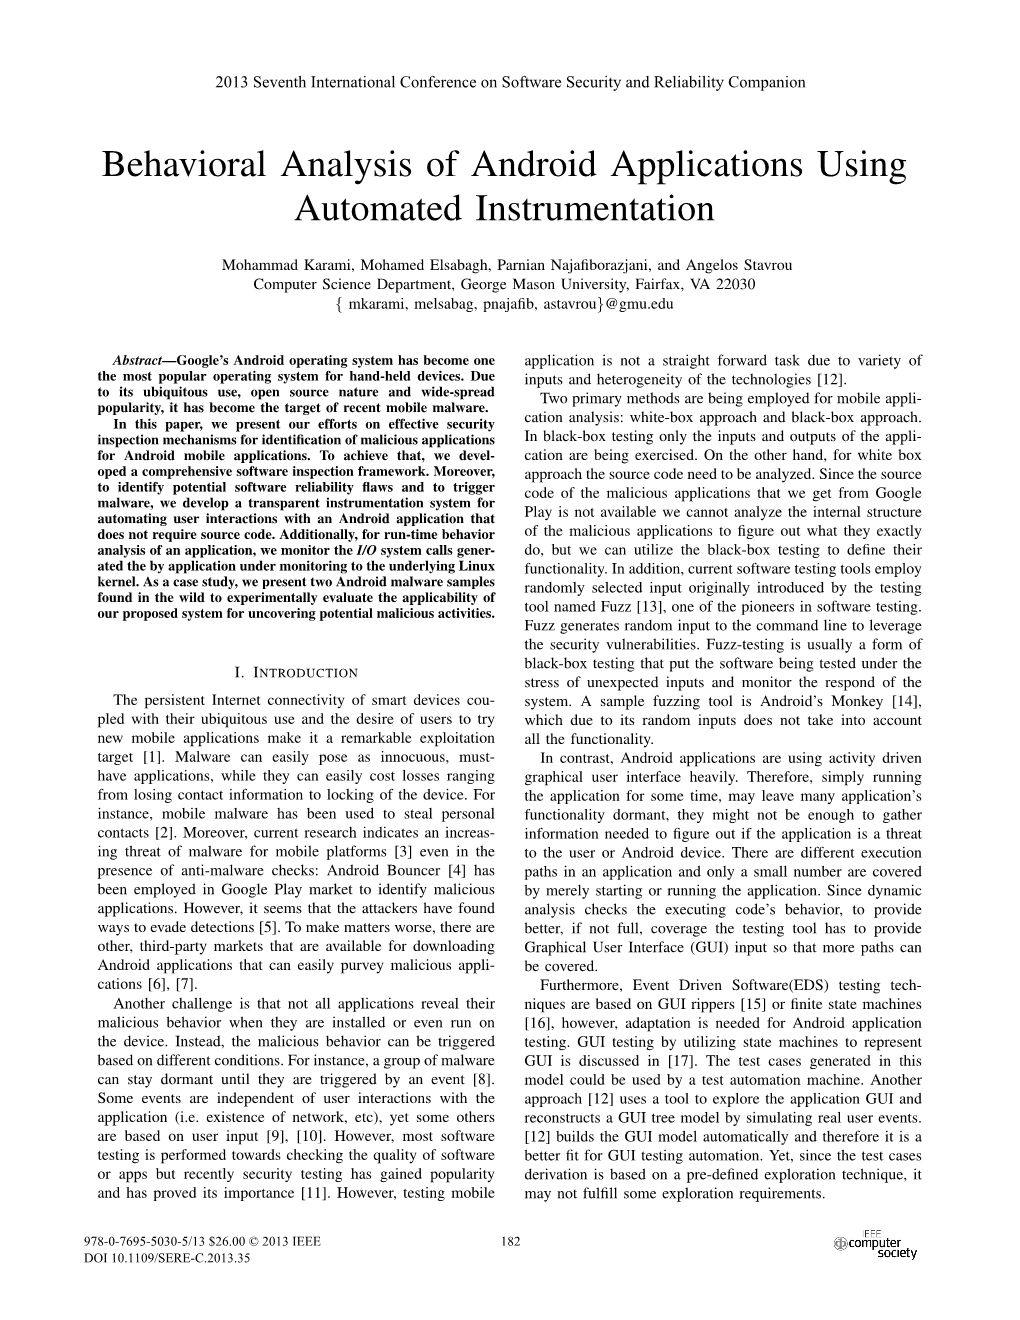 Behavioral Analysis of Android Applications Using Automated Instrumentation